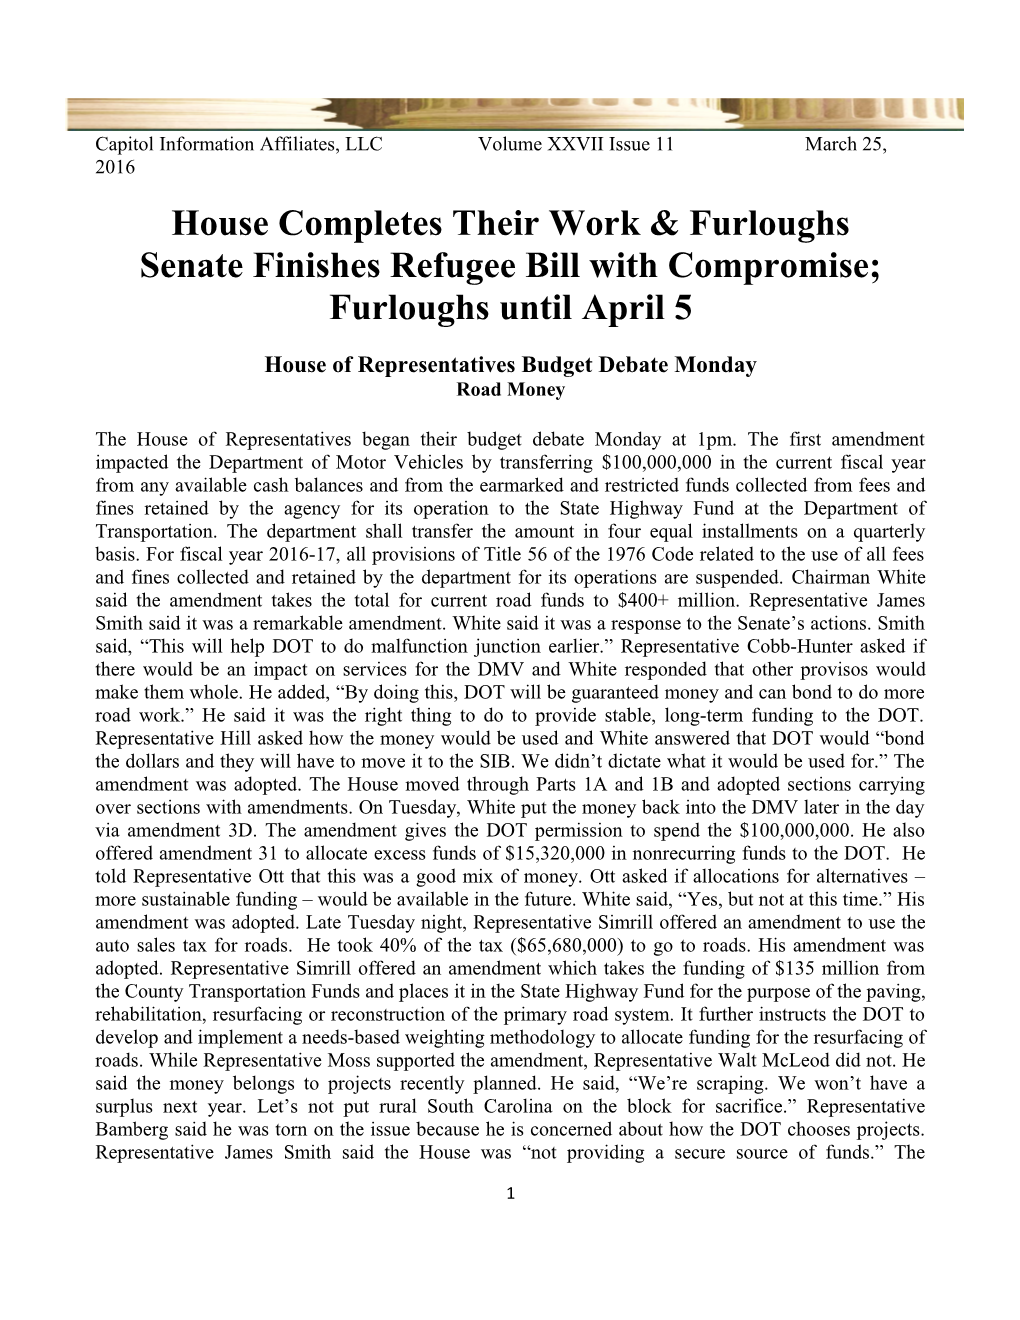 House Completes Their Work & Furloughs